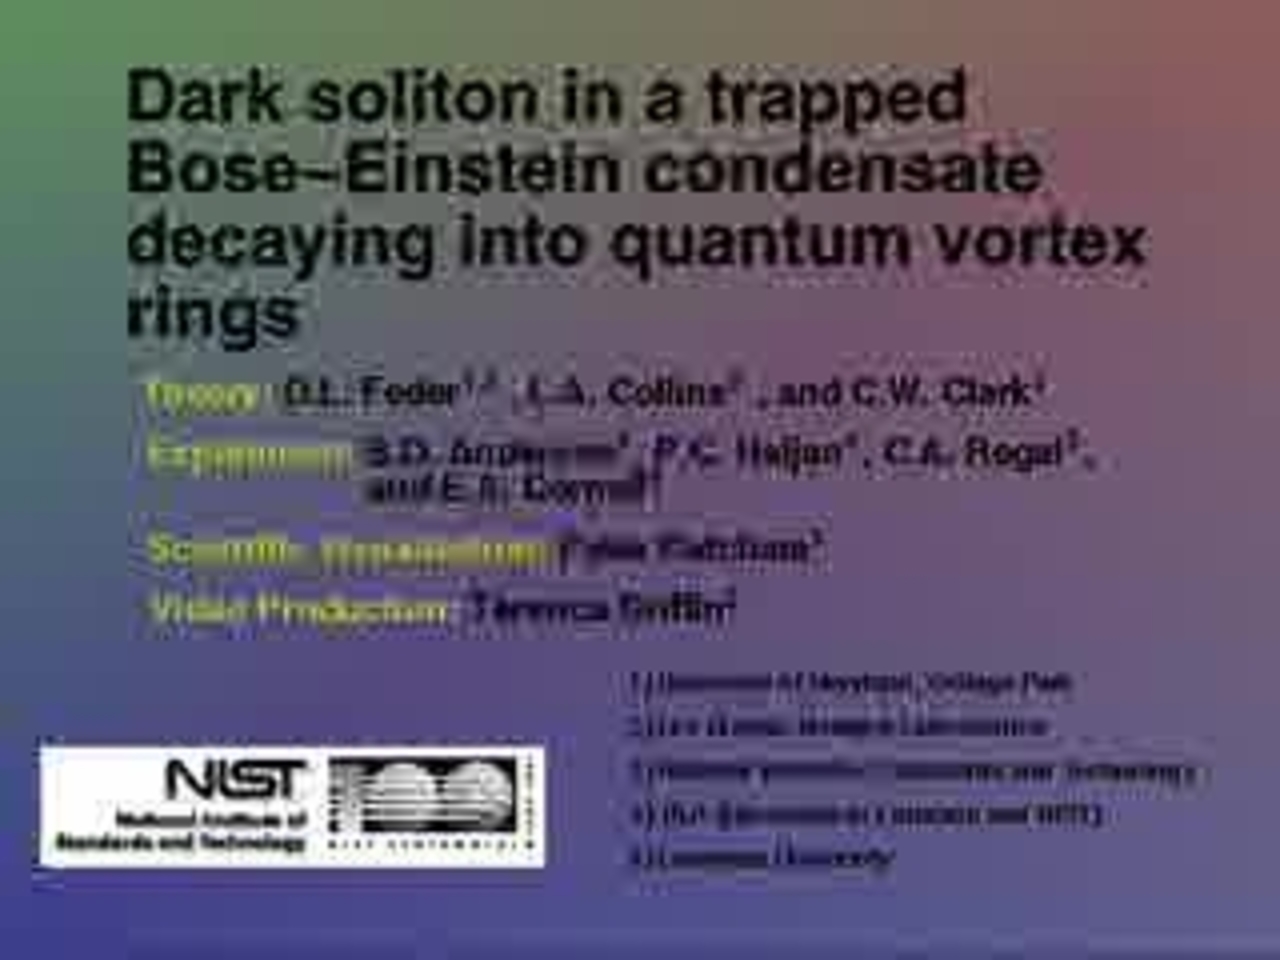 Decay of Dark Solitons in a Bose-Einstein Condensate into Vortex Rings